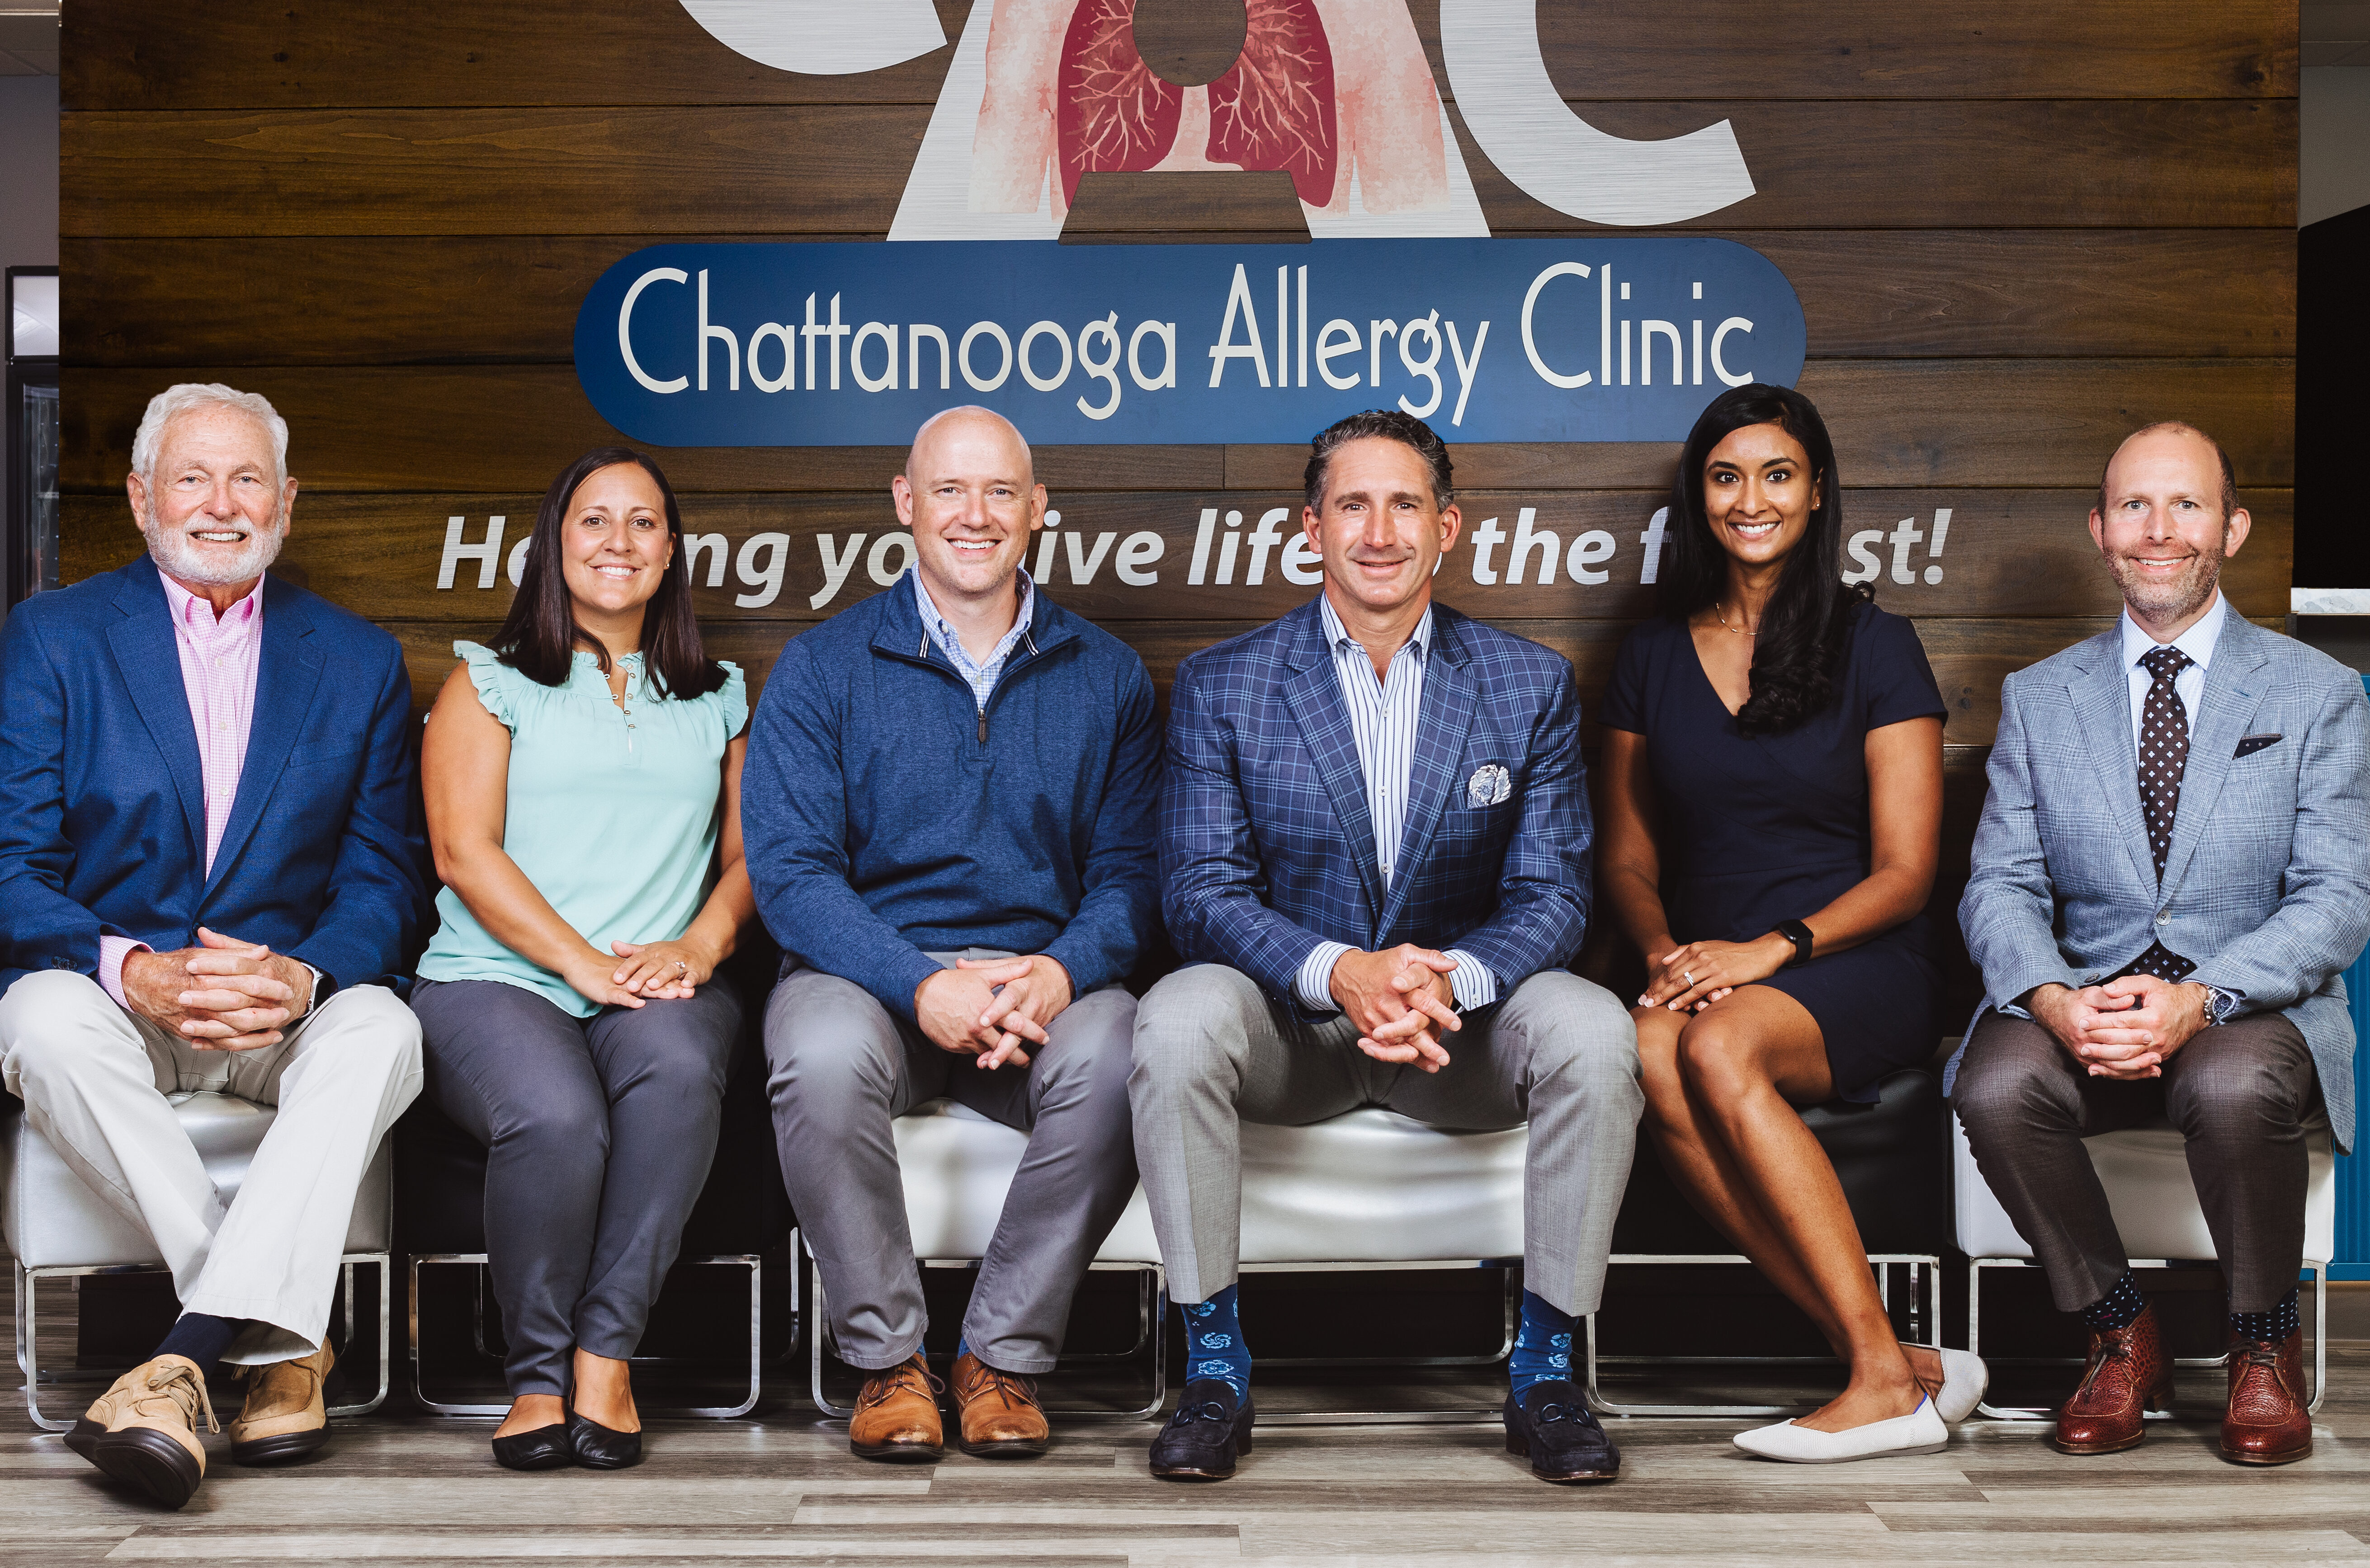 Chattanooga Allergy Clinic: Allergists Near Me | Allergy Testing ...